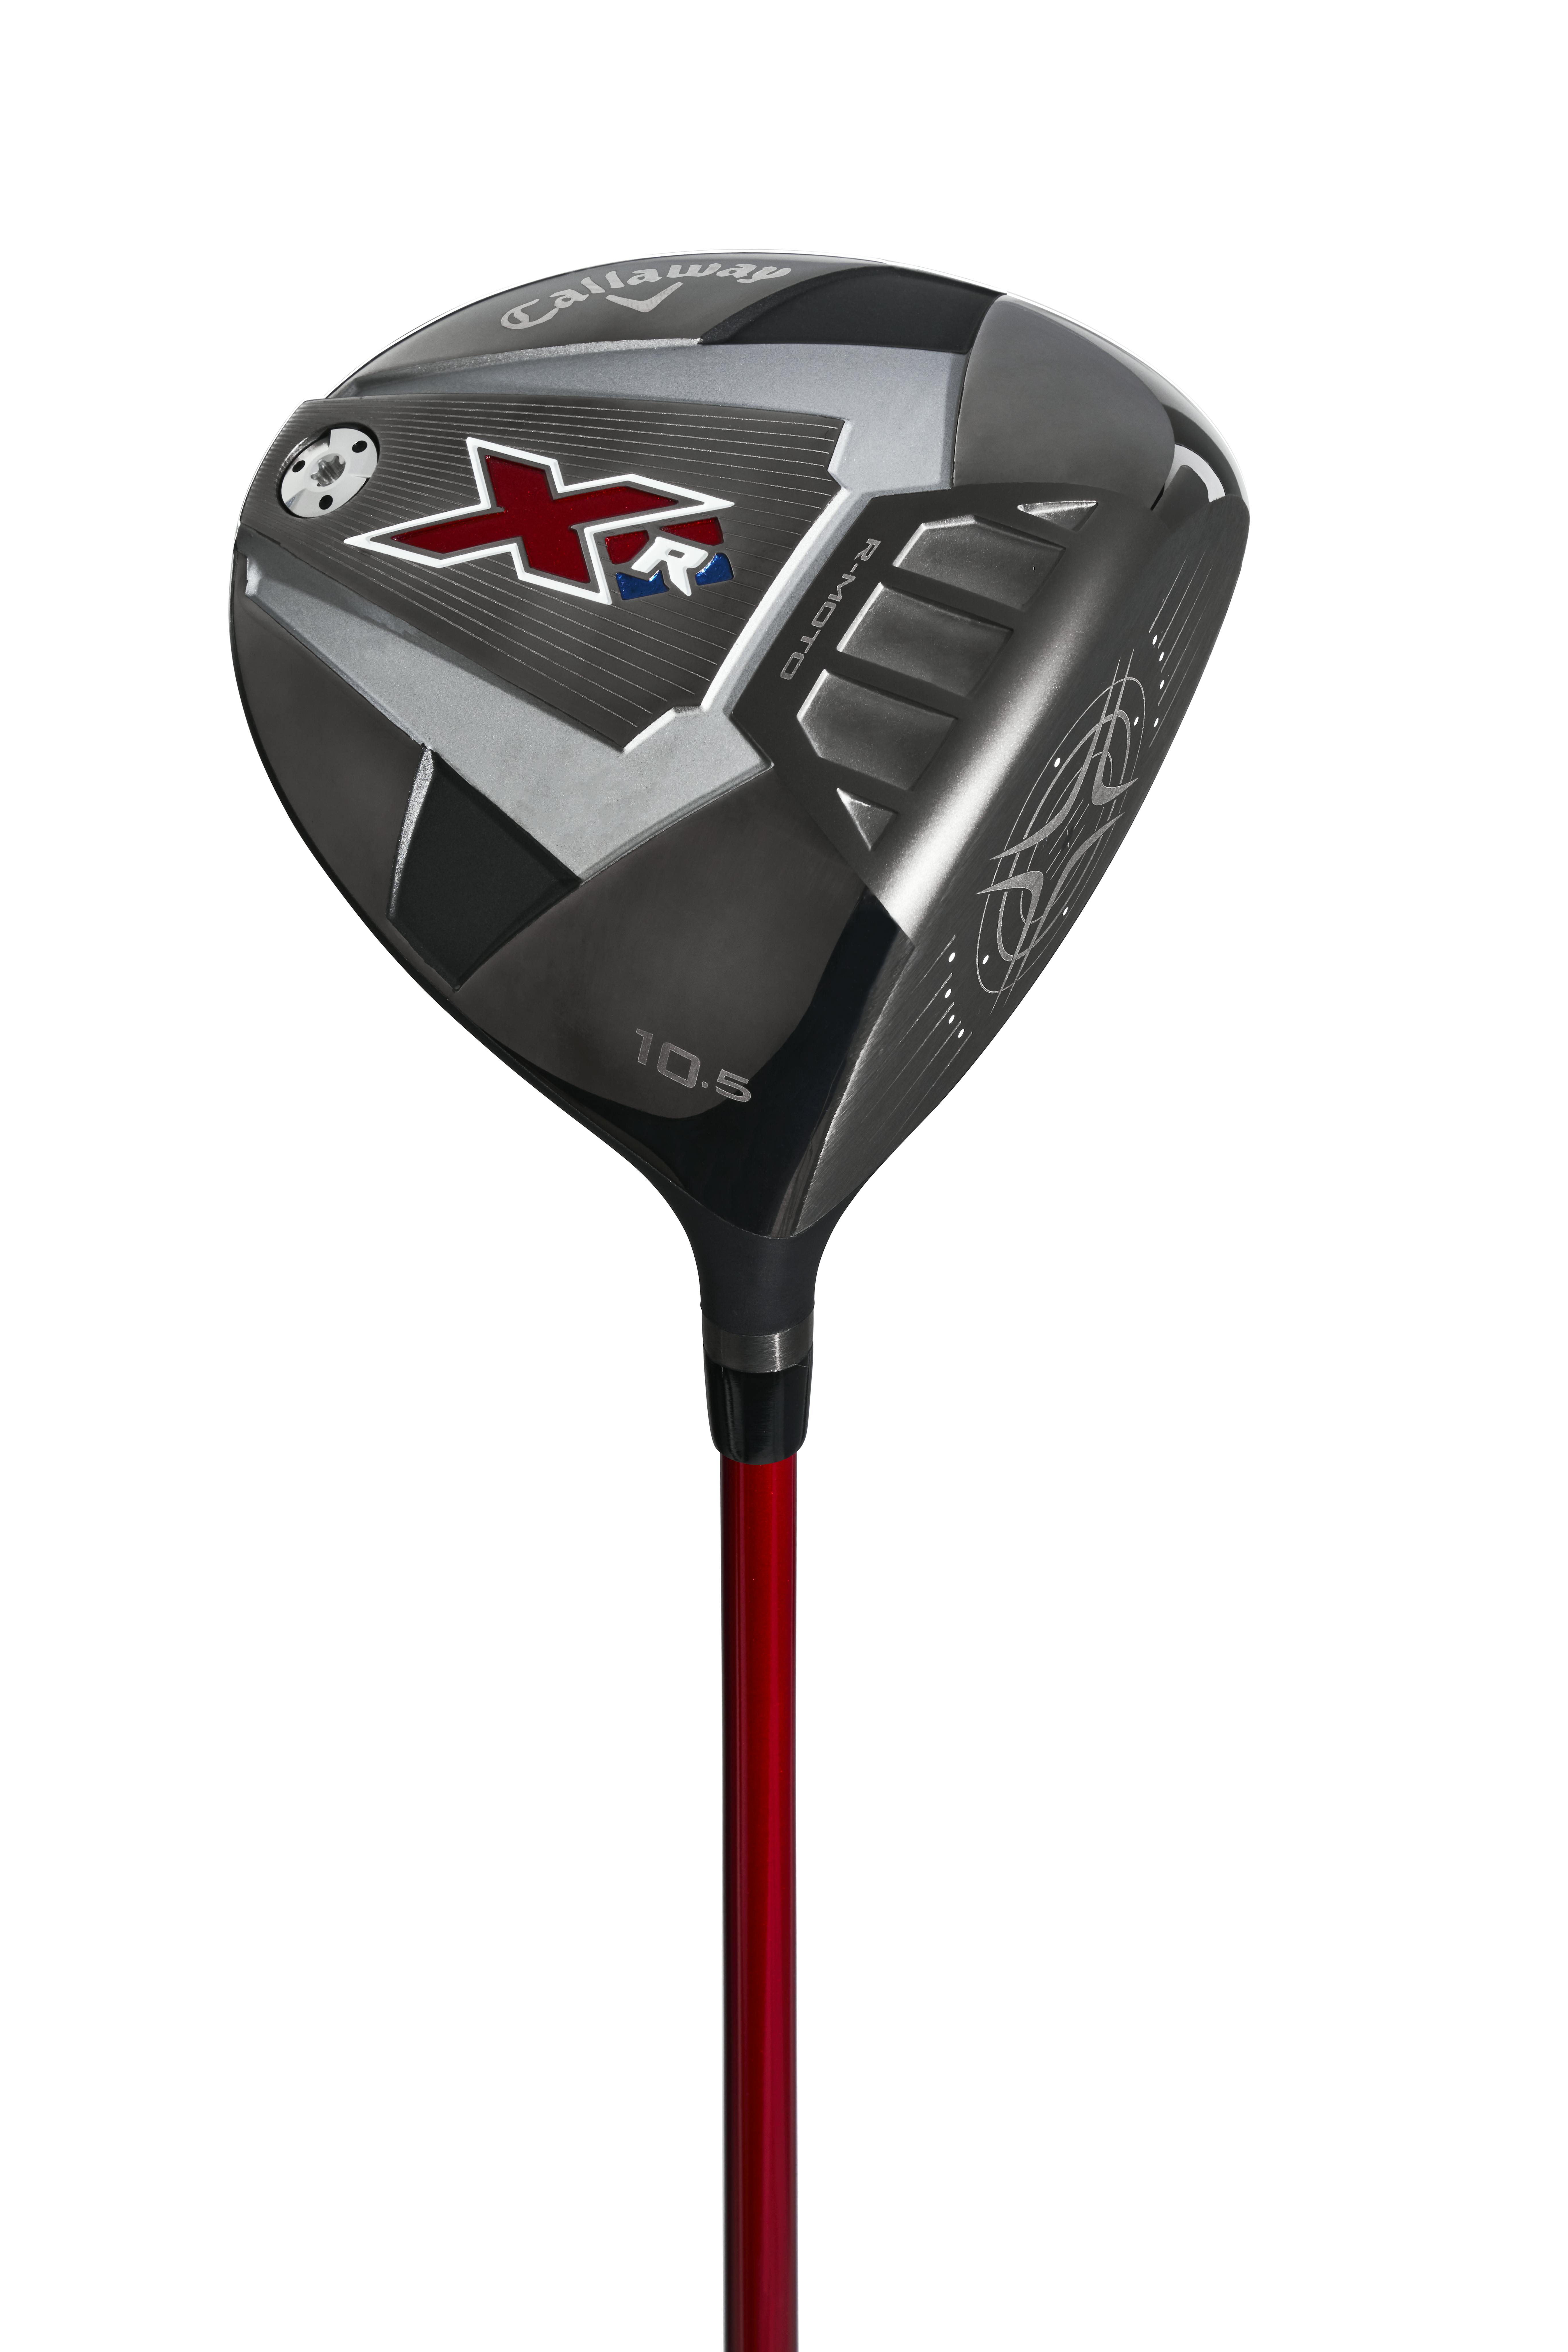 Callaway XR Packaged Complete Golf Set · Right Handed · Graphite · Senior · Standard